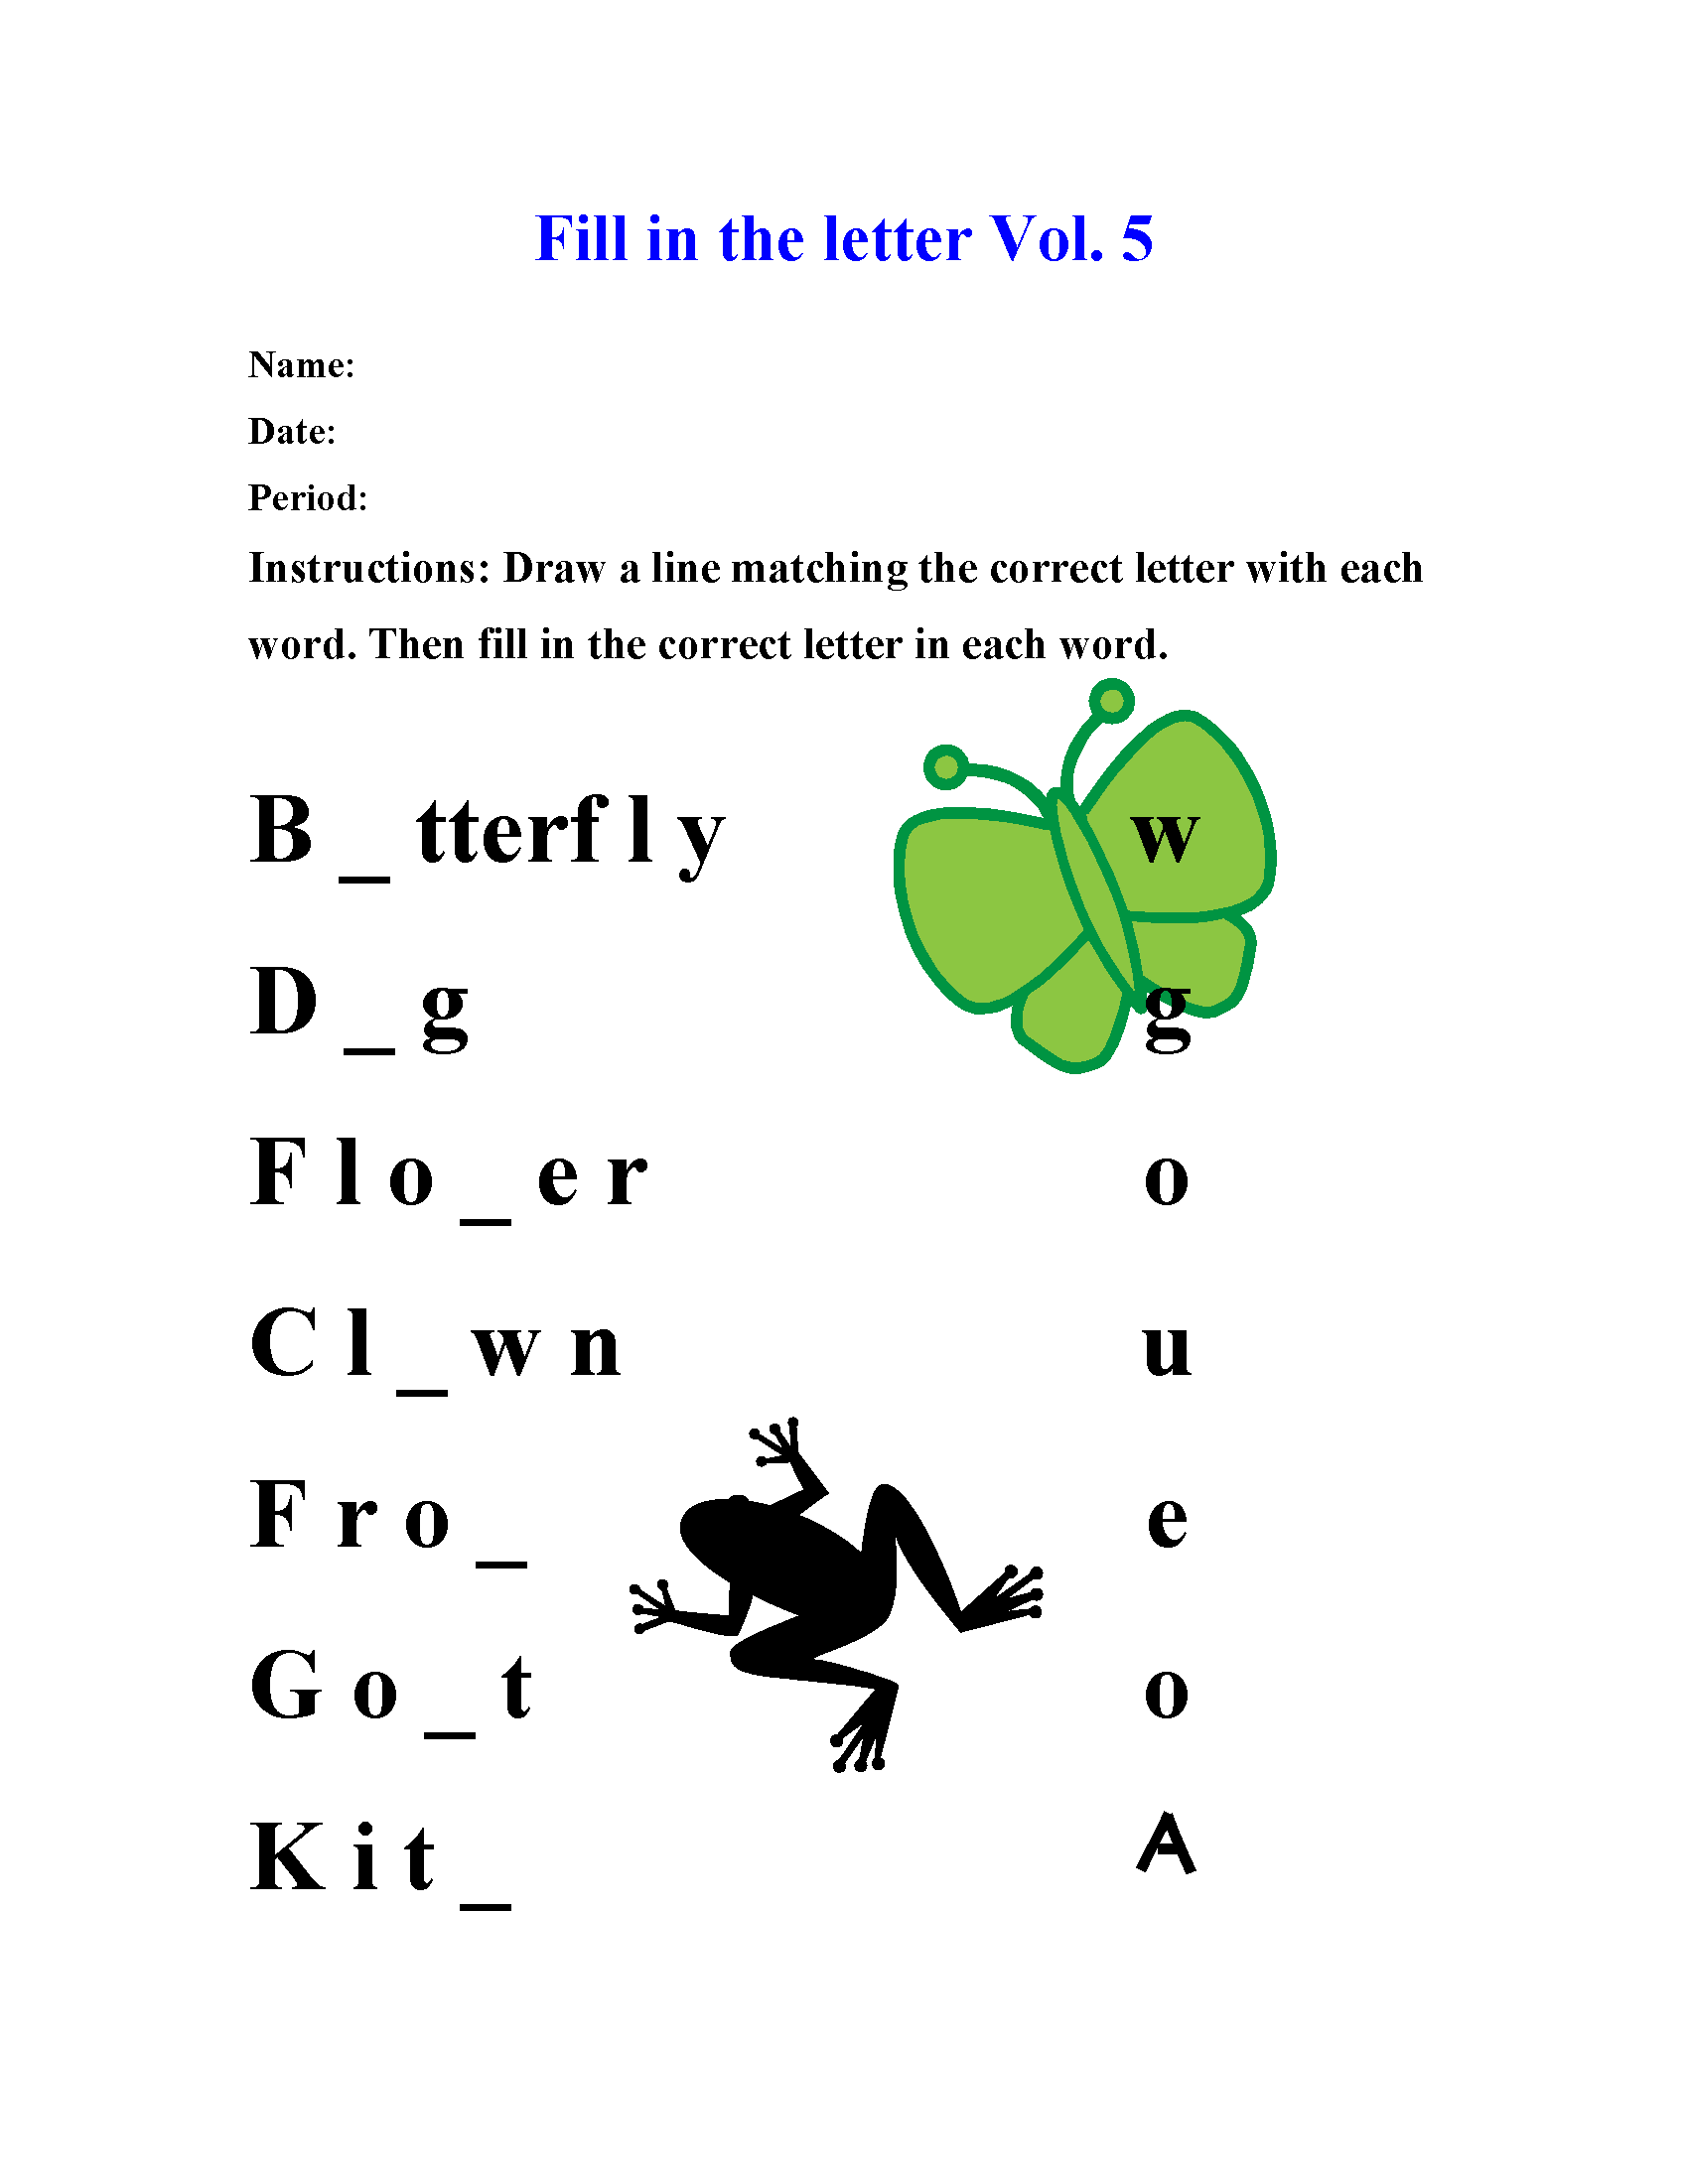 Fill in the letter Vol 5